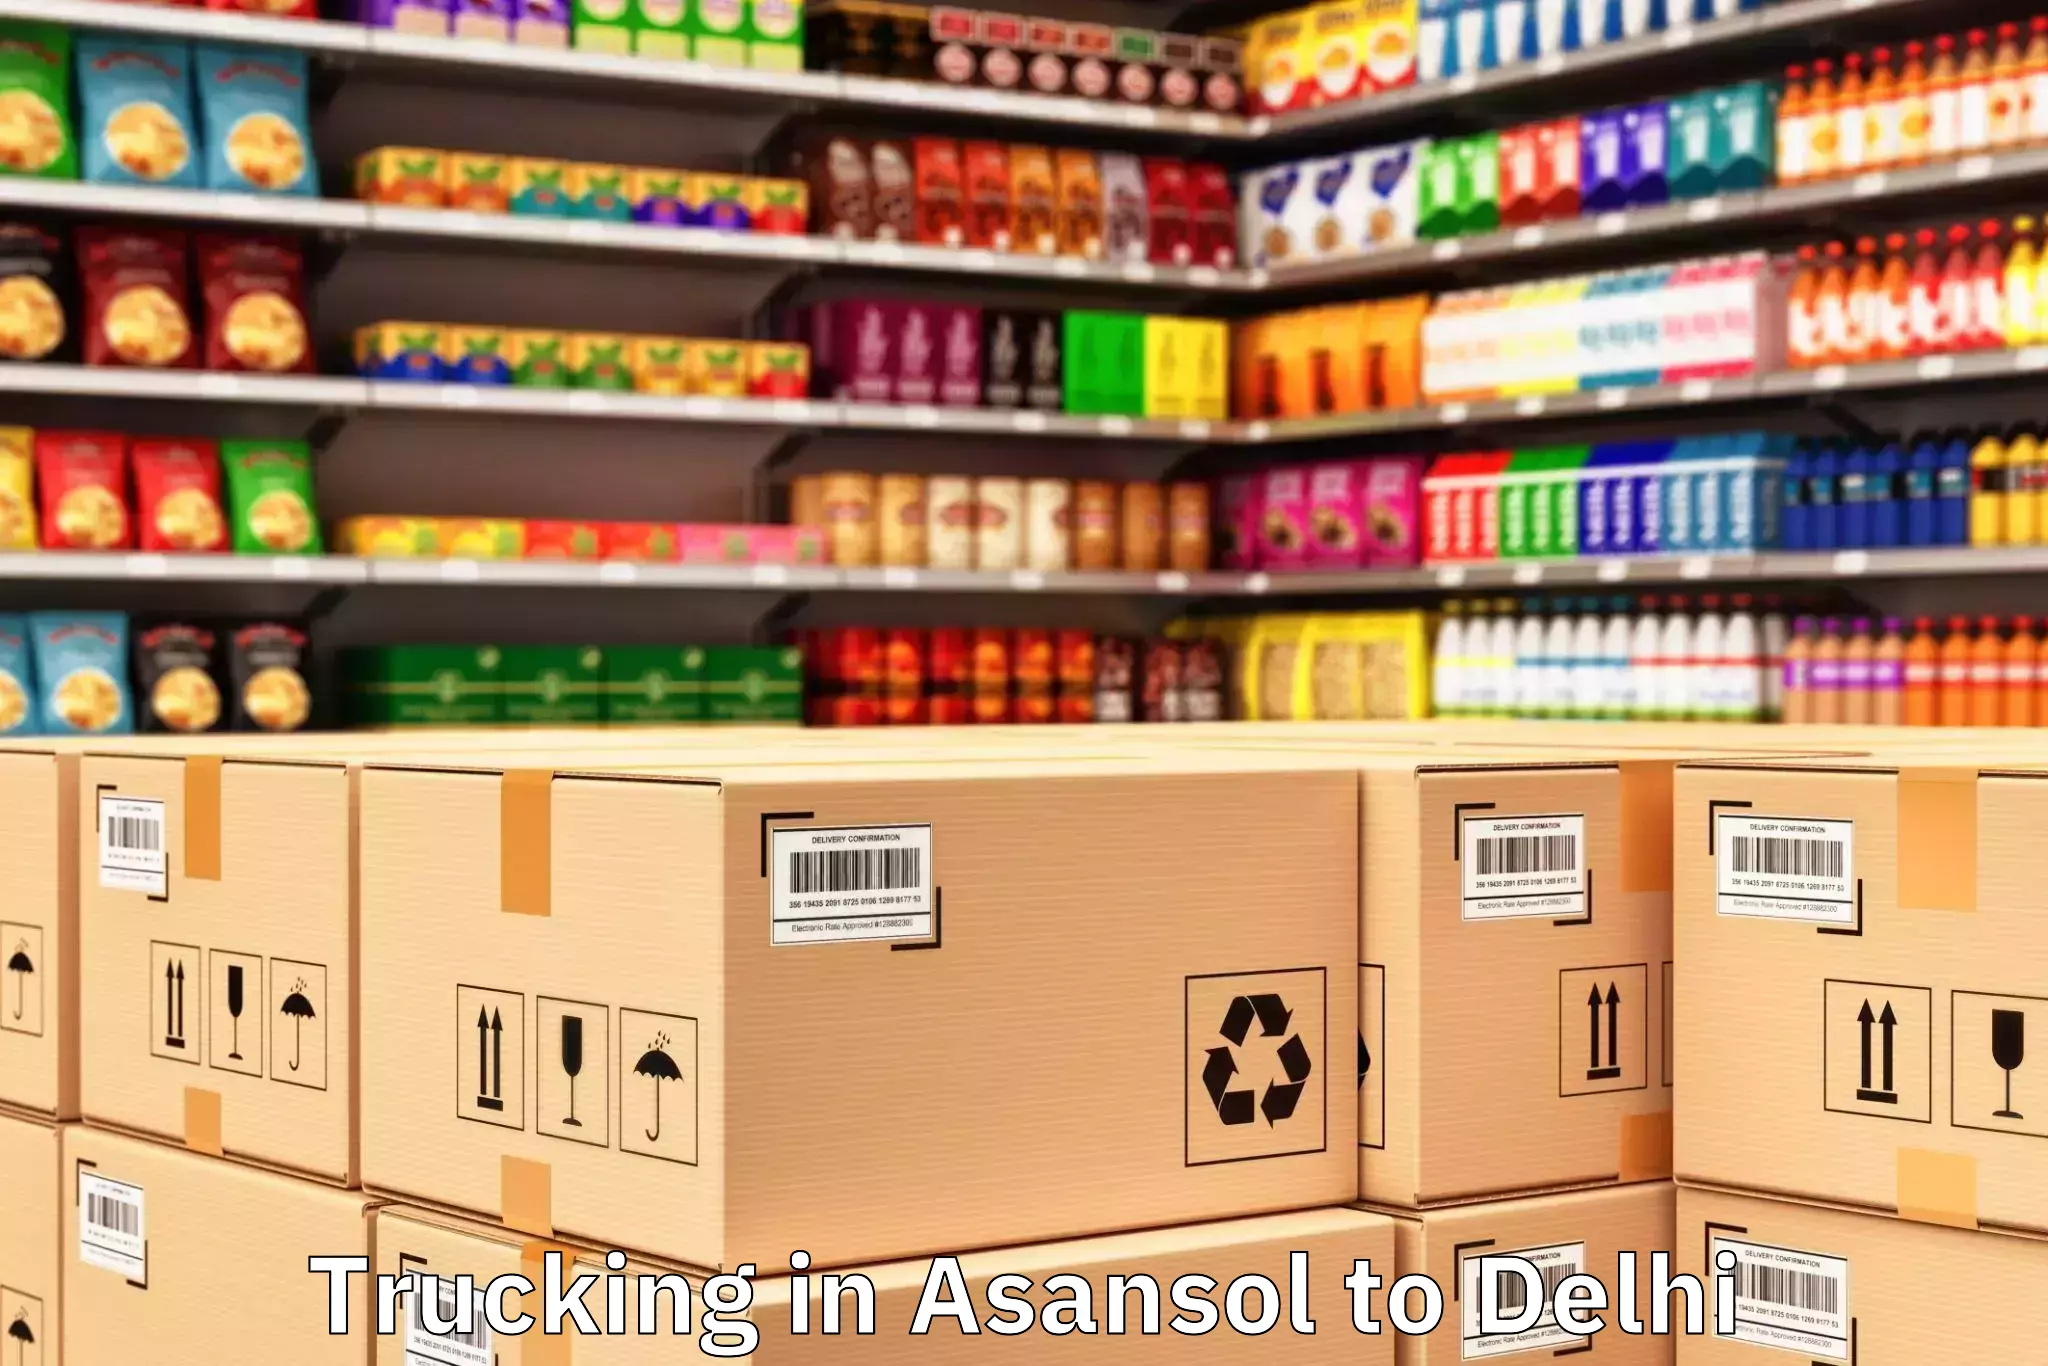 Affordable Asansol to V3s East Centre Mall Trucking